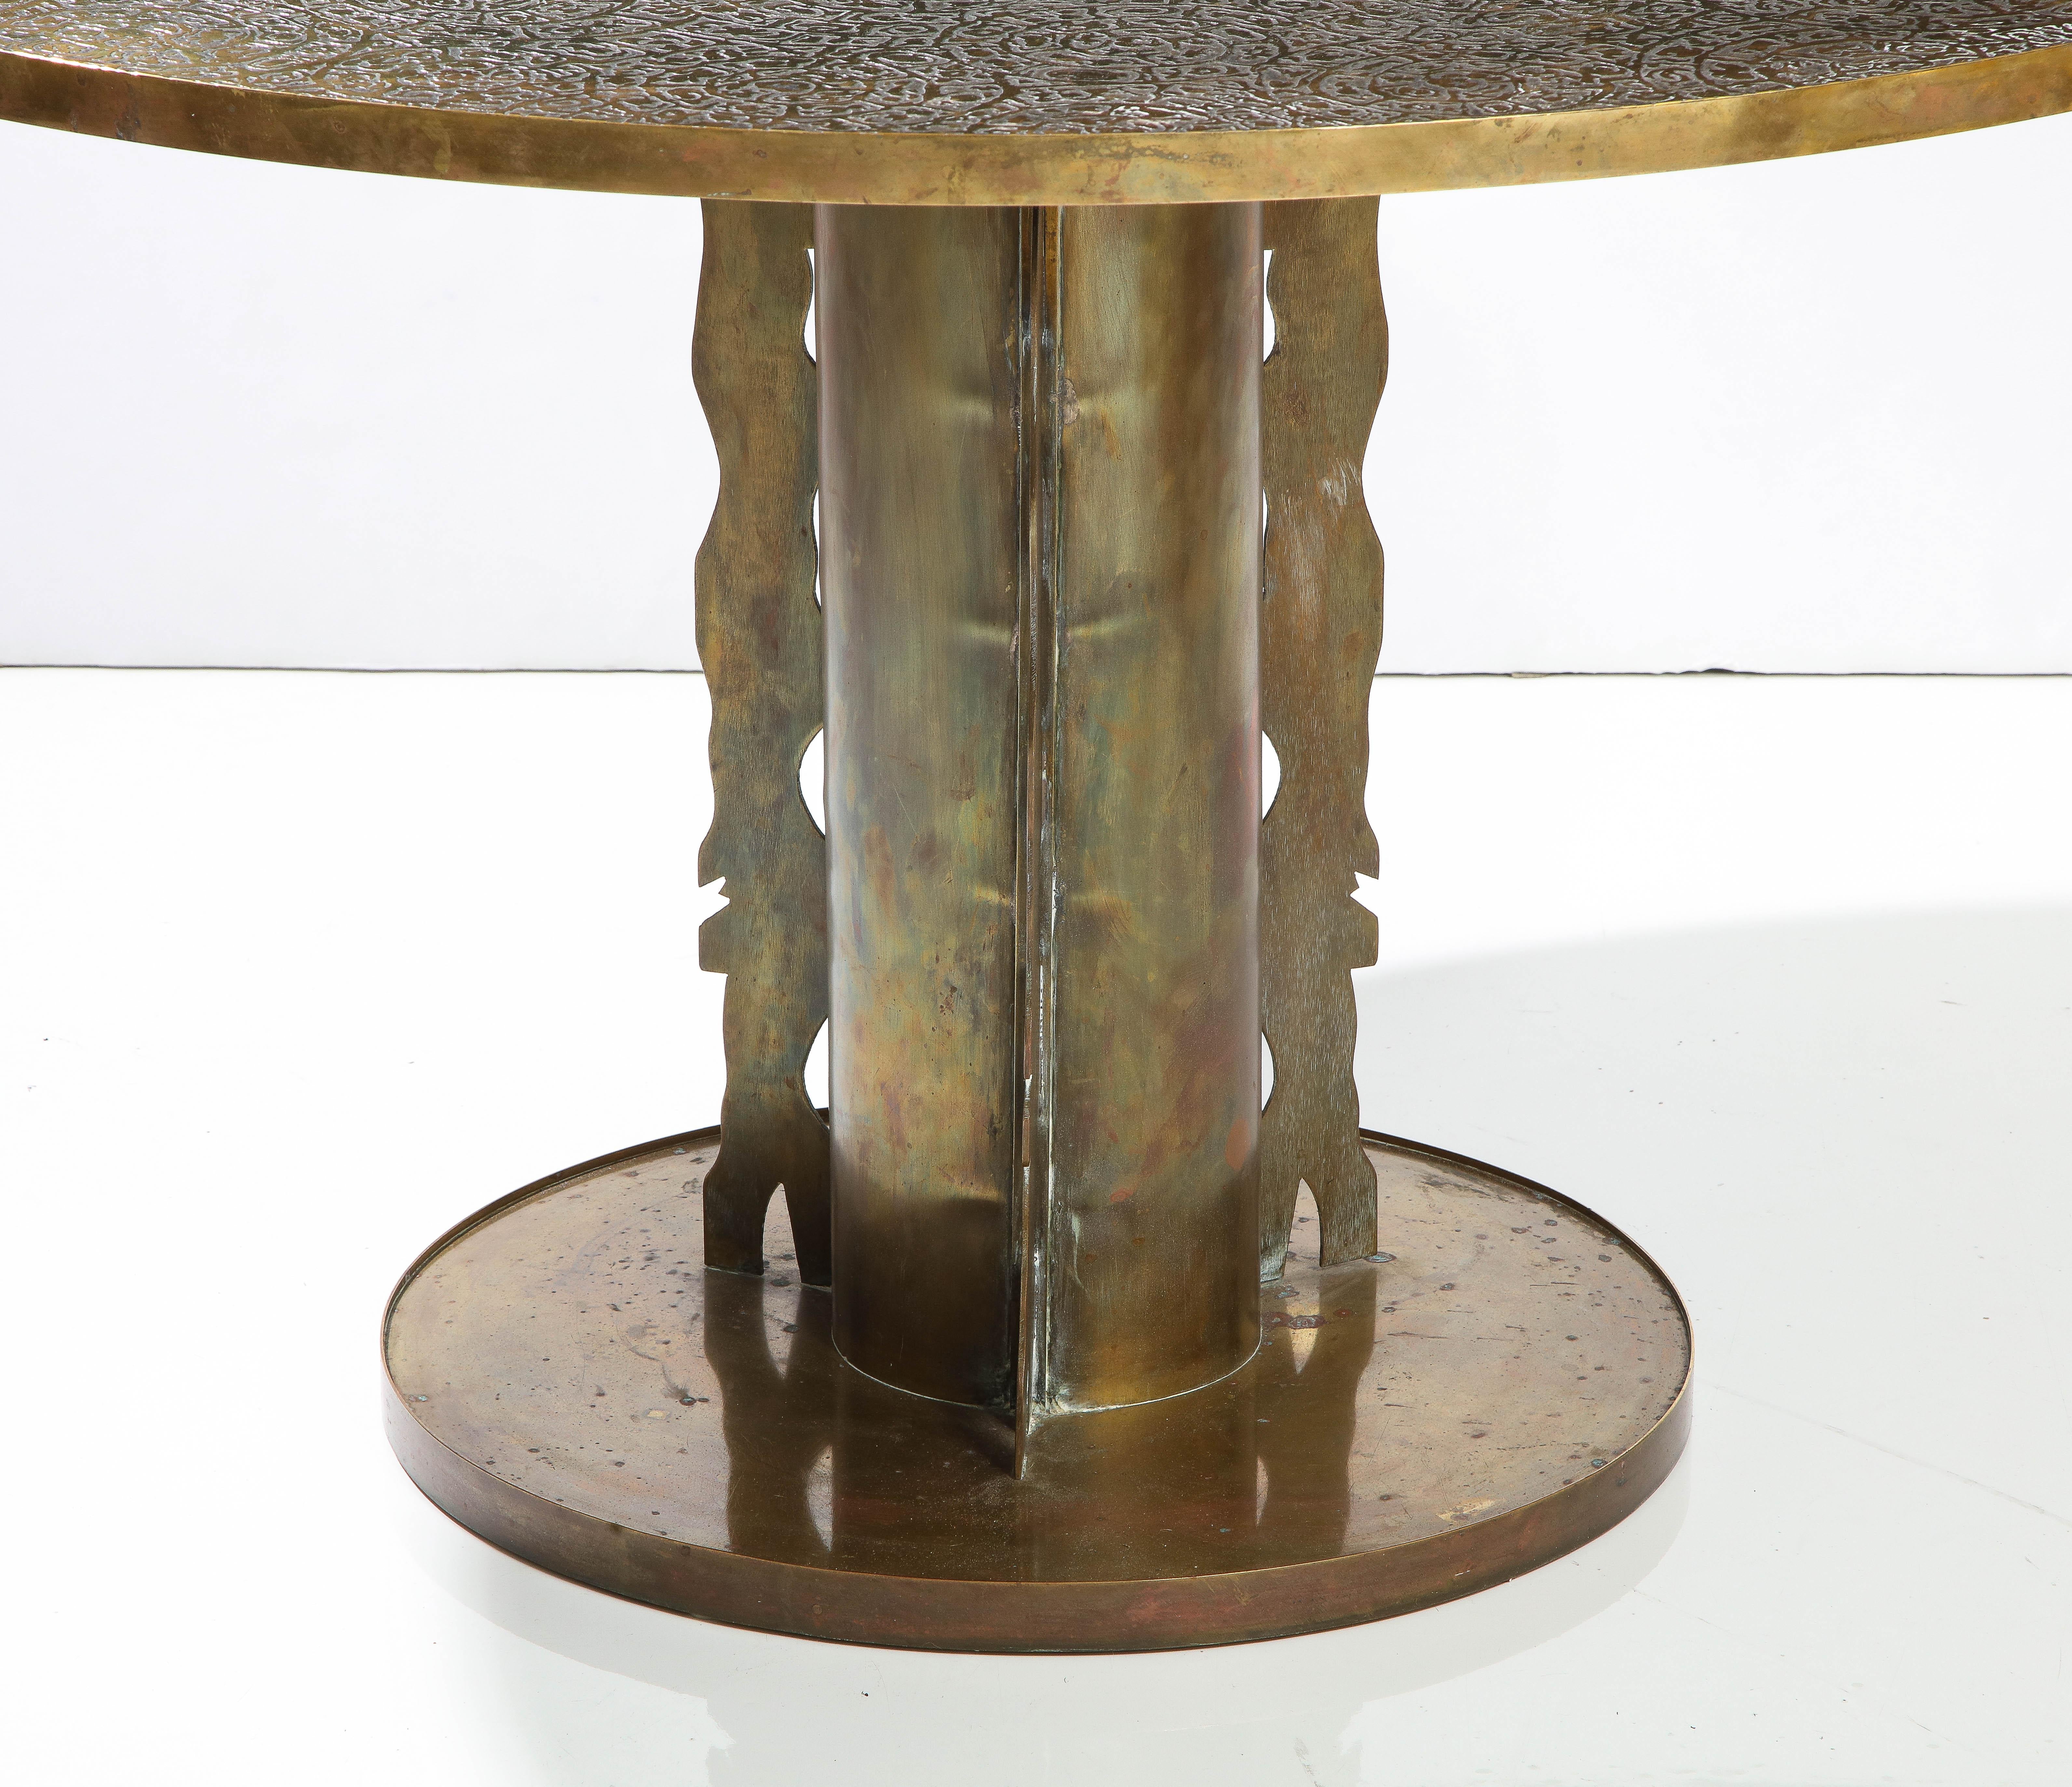 Philip and Kelvin Laverne Etruscan Dining / Centre table.
Bronze table inlaid with Brass, Depicting An Etruscan spiral design pattern.
The table has a wonderful aged patina.